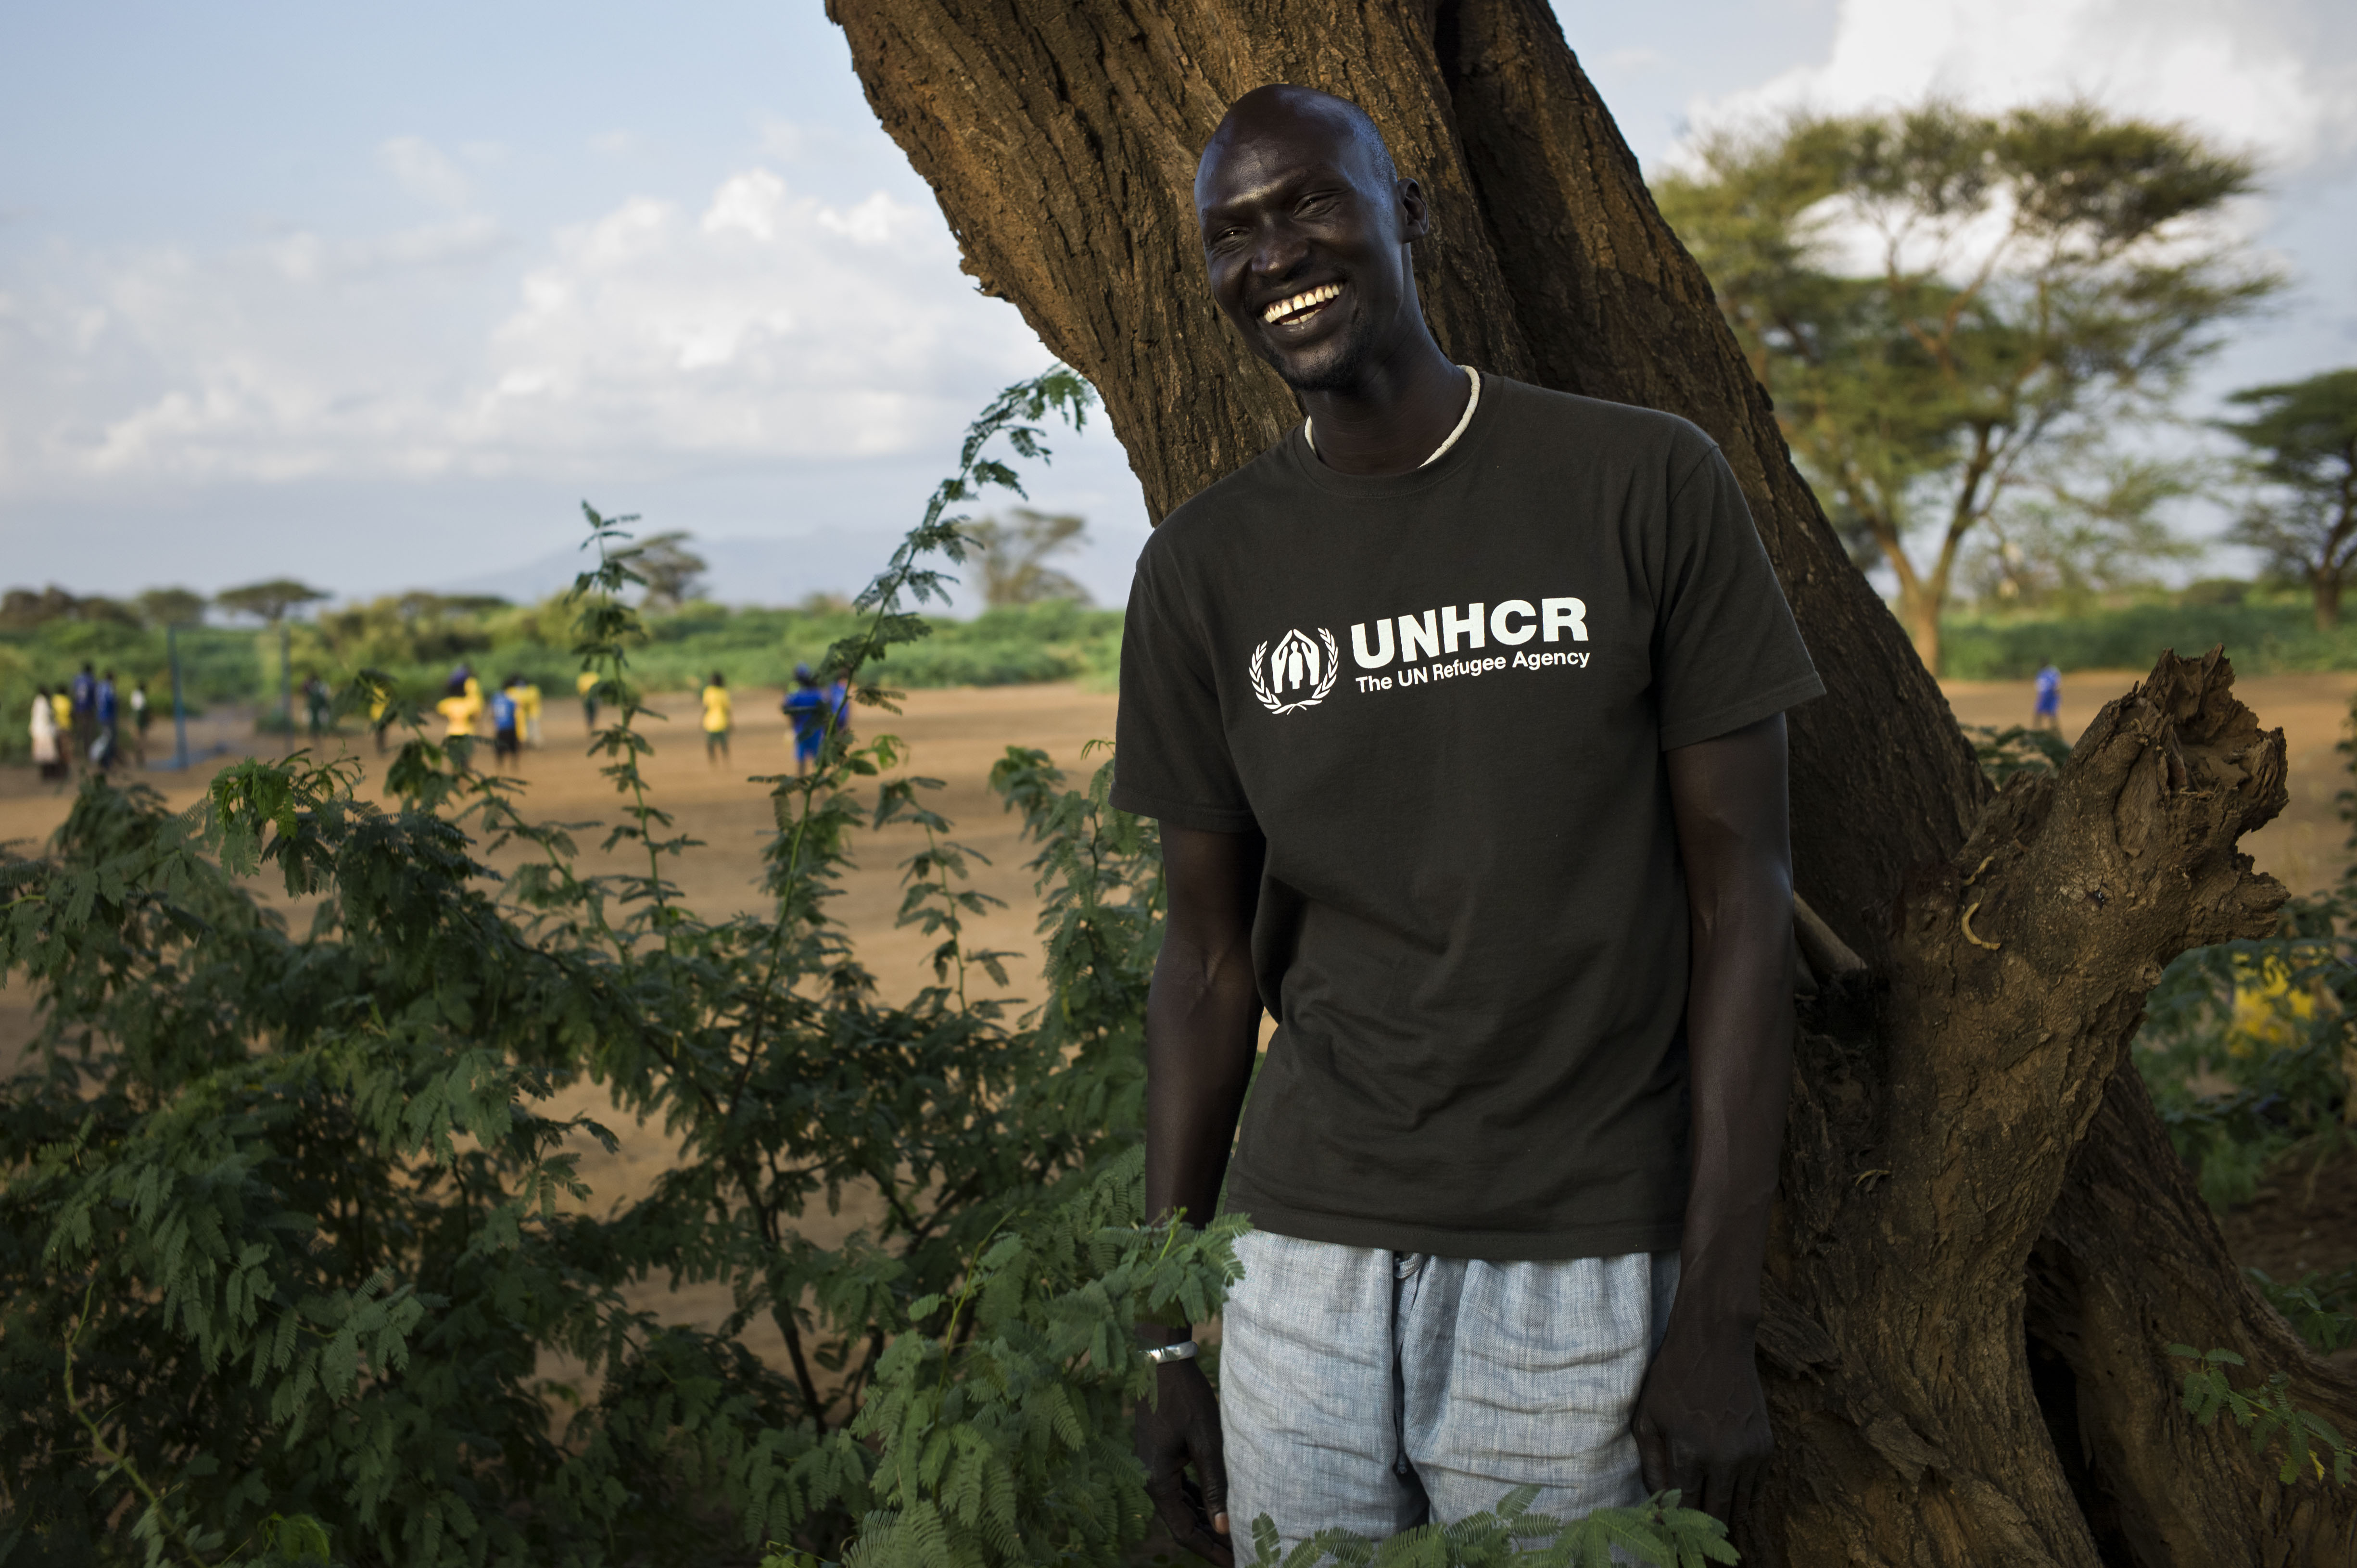 Long journey: Ger Duany has gone into acting since arriving in the United States as a refugee. | © UNHCR/DOMINIC NAHR